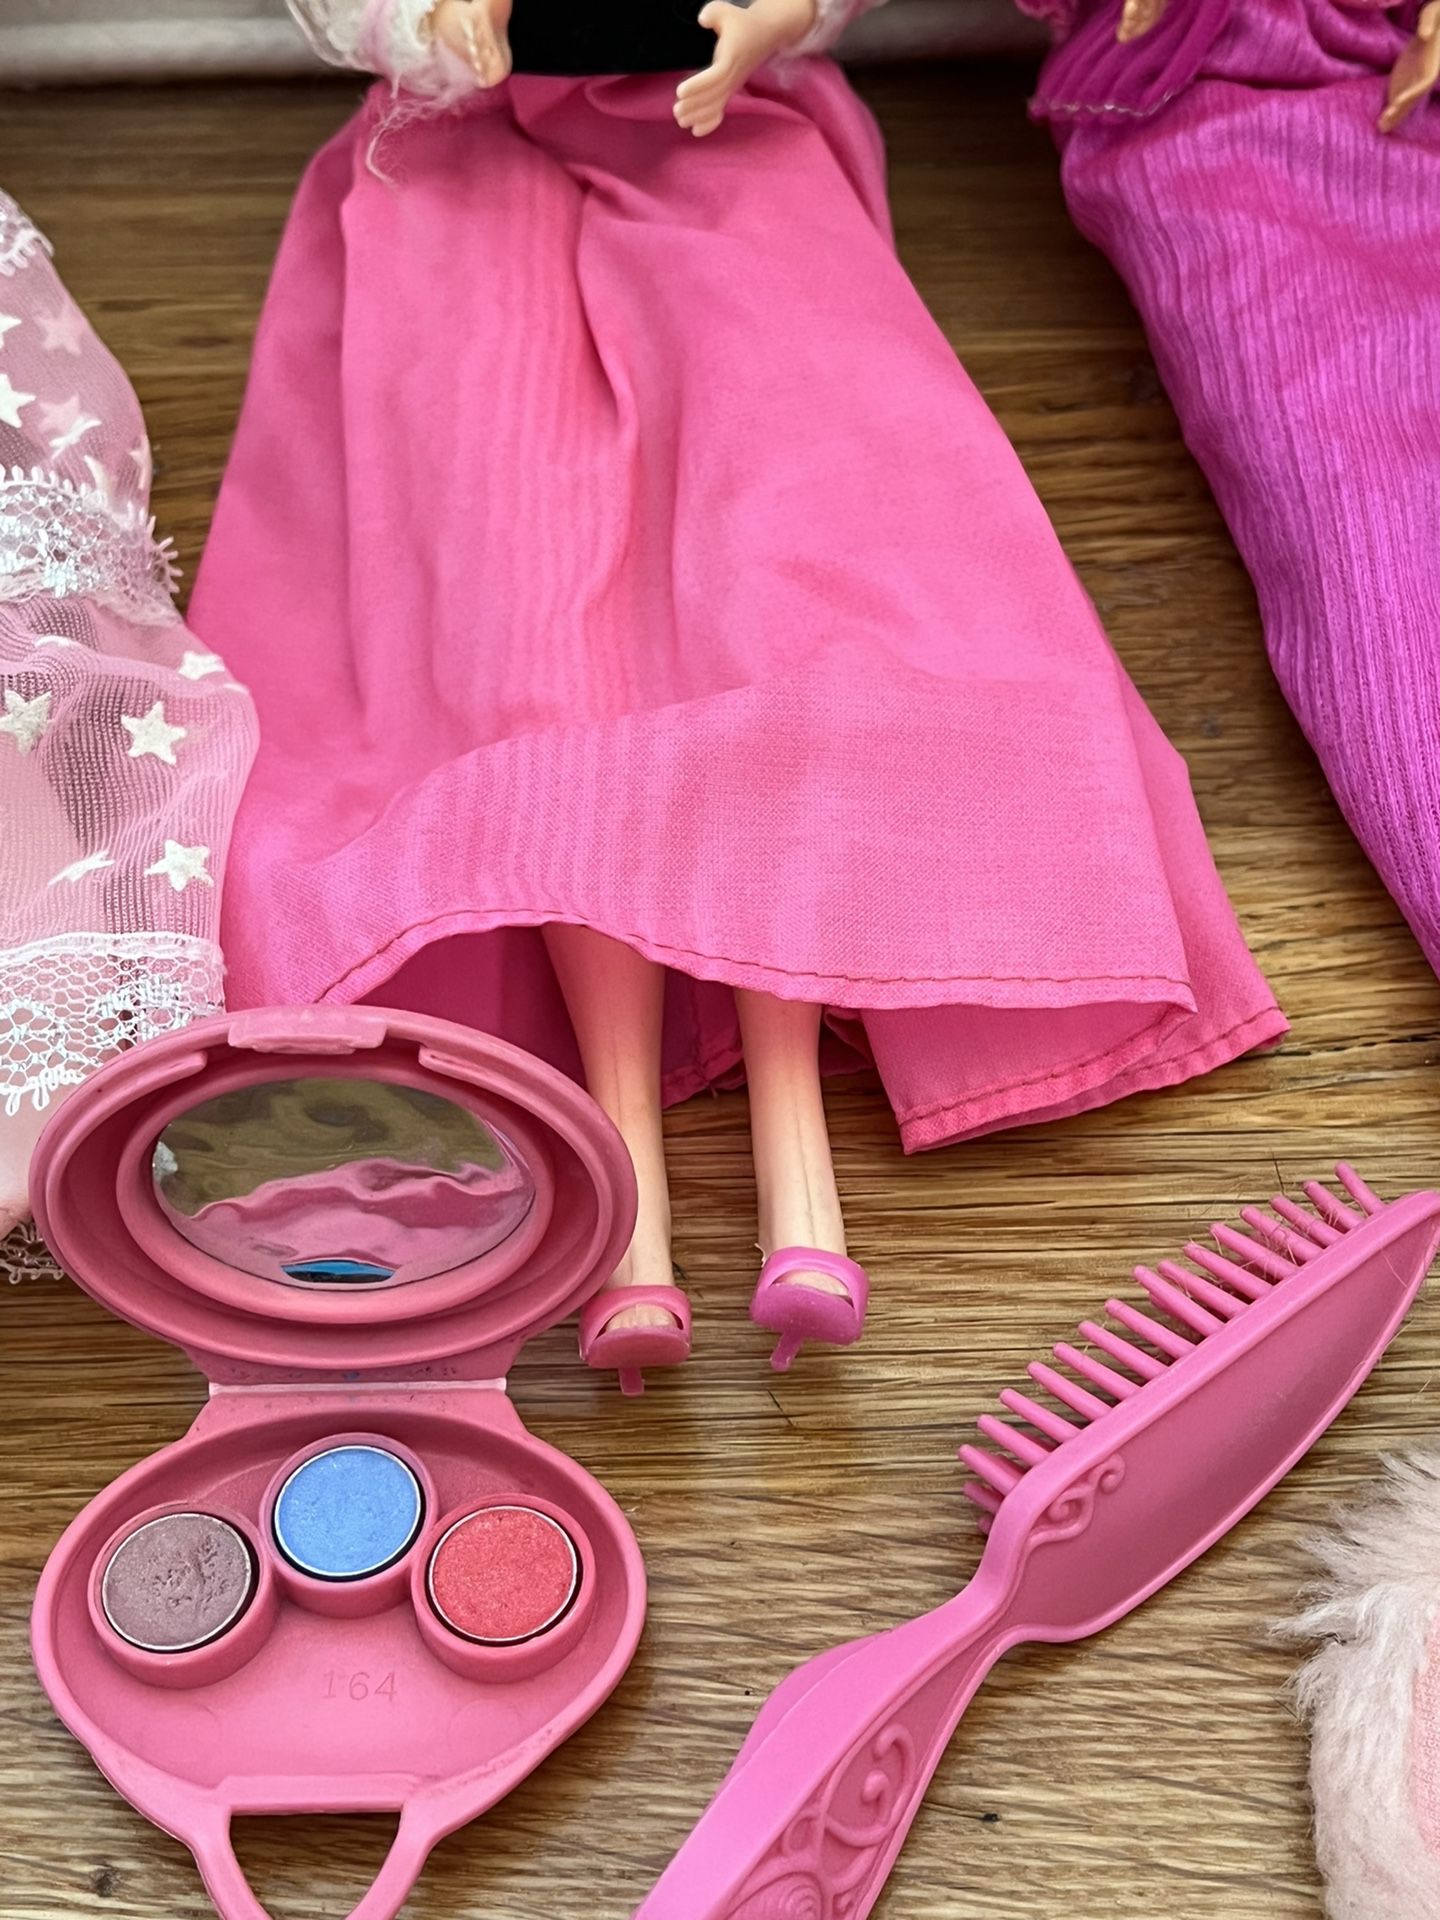 Vintage 1980s Barbies And Accessories 